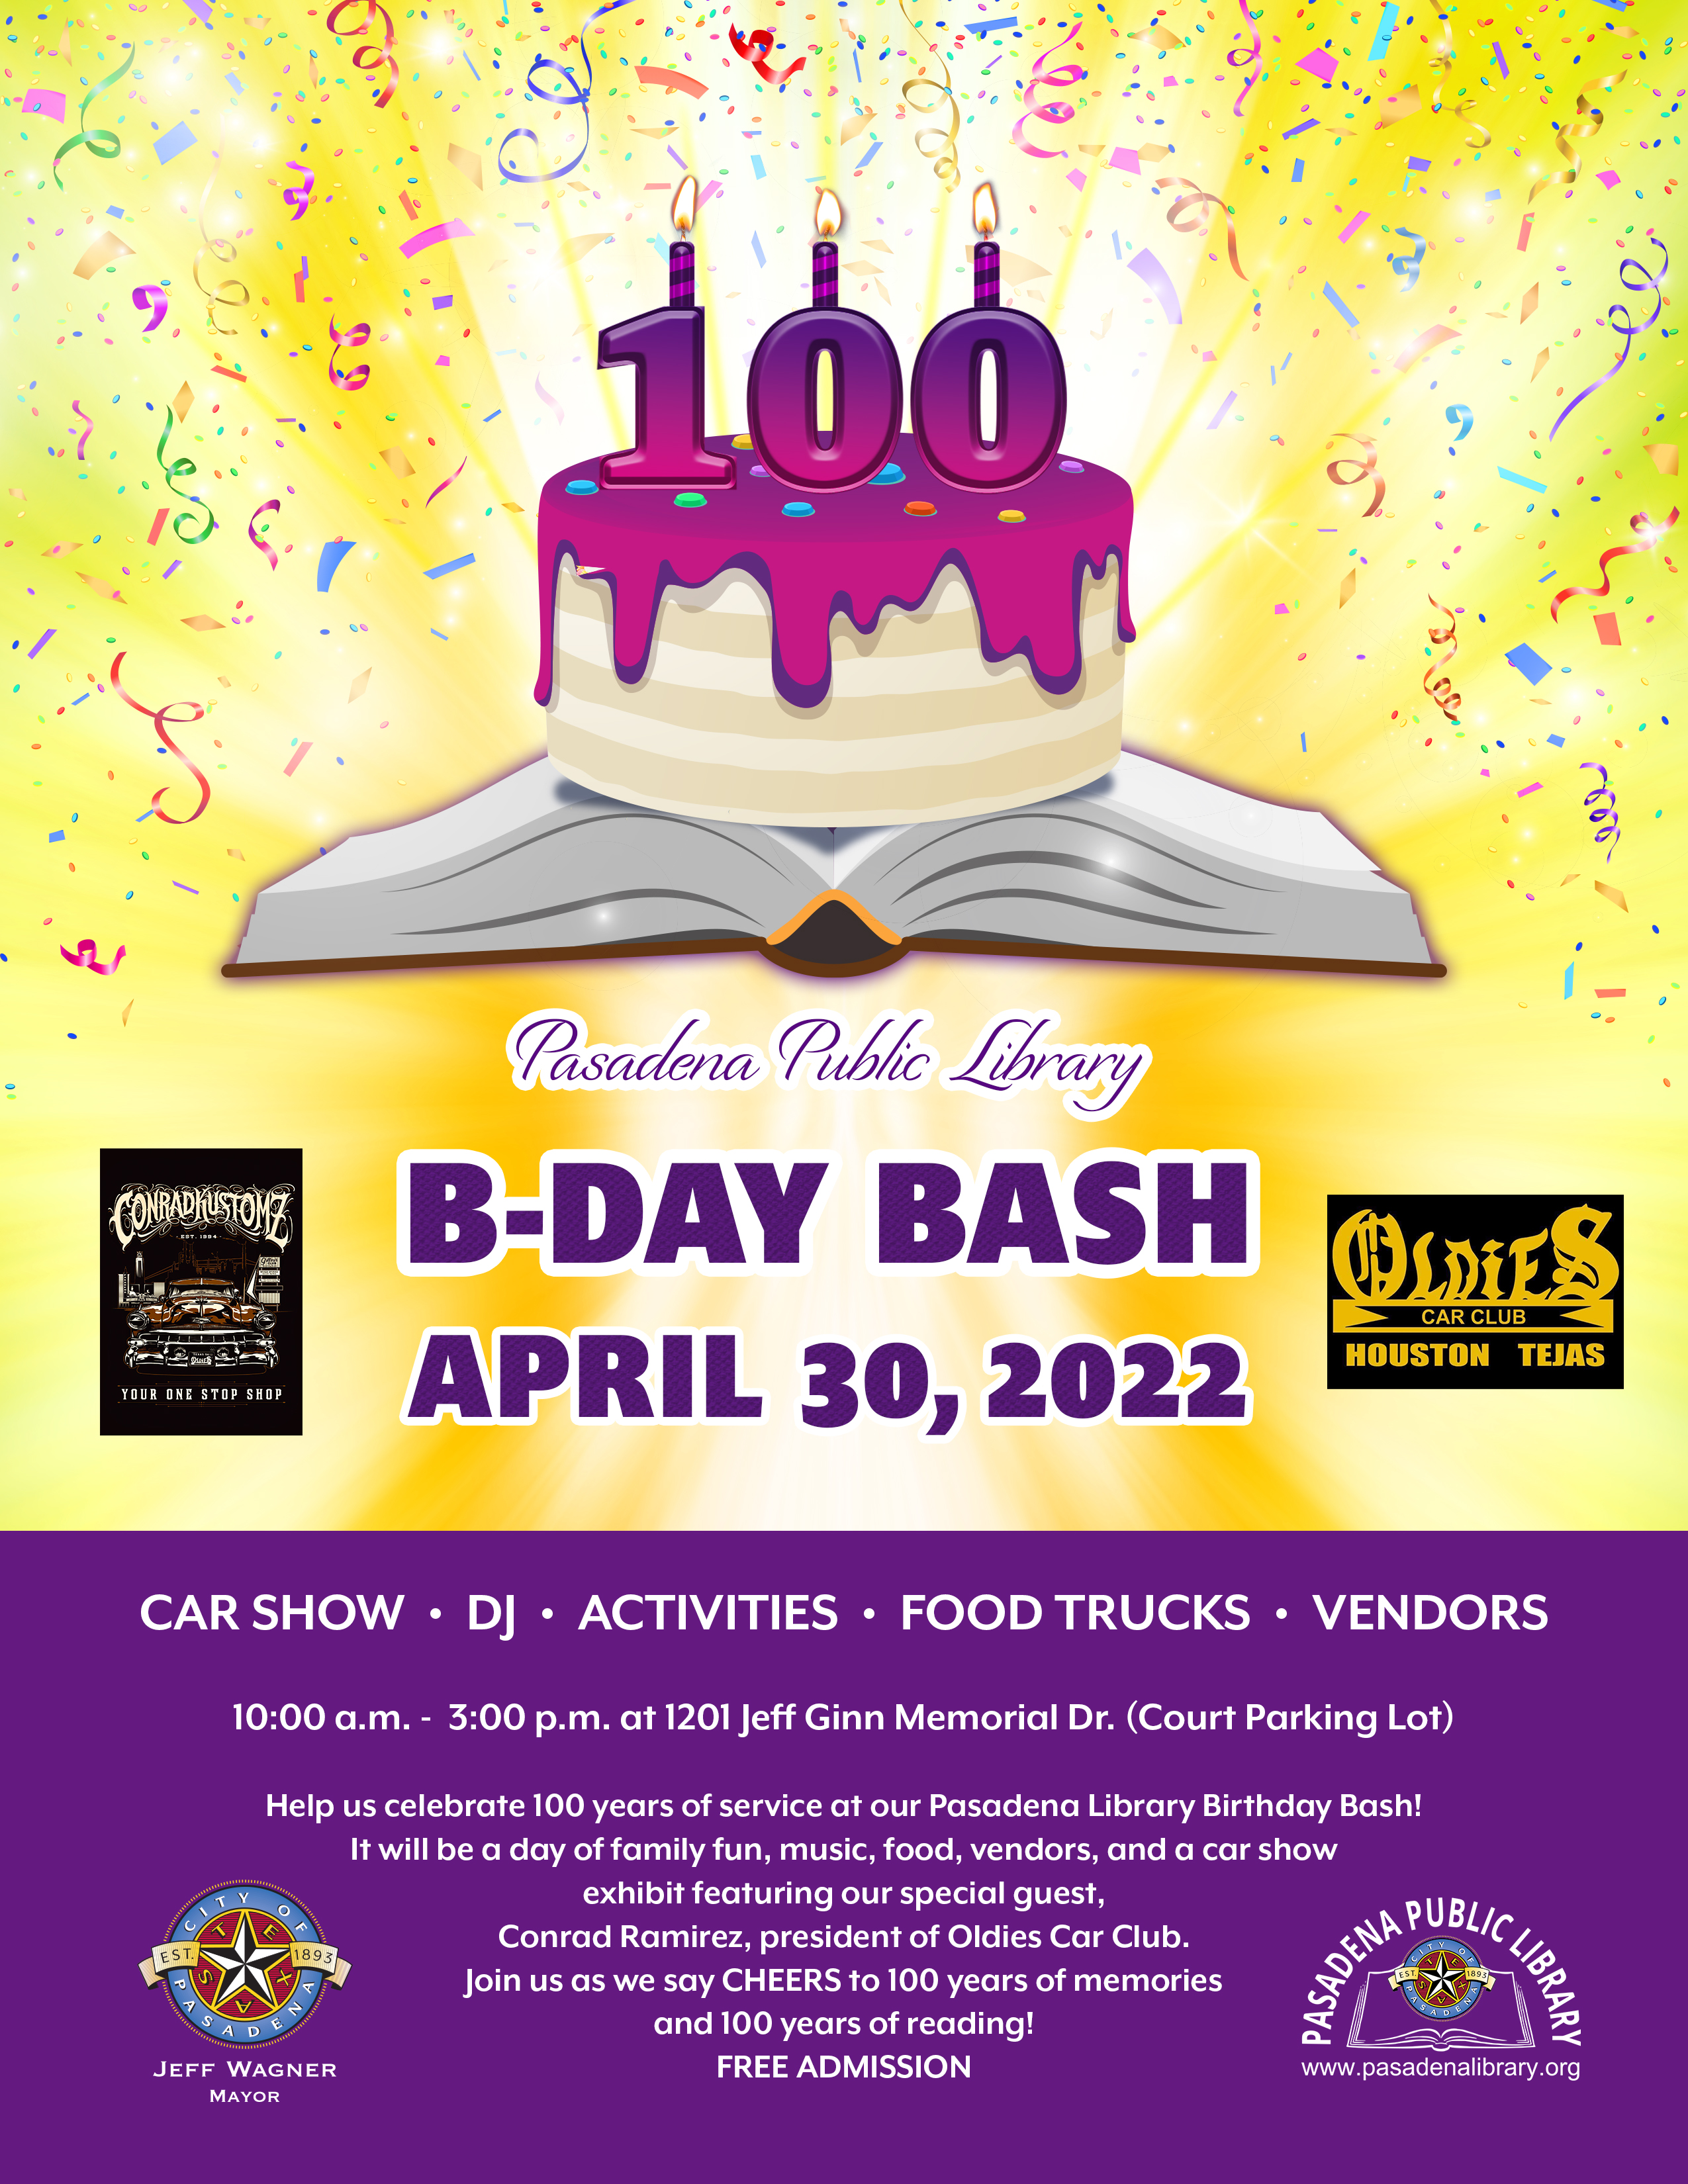 Pasadena Library B-Day Bash! Saturday, April 30, 2022 from 10:00 AM to 3:00 PM